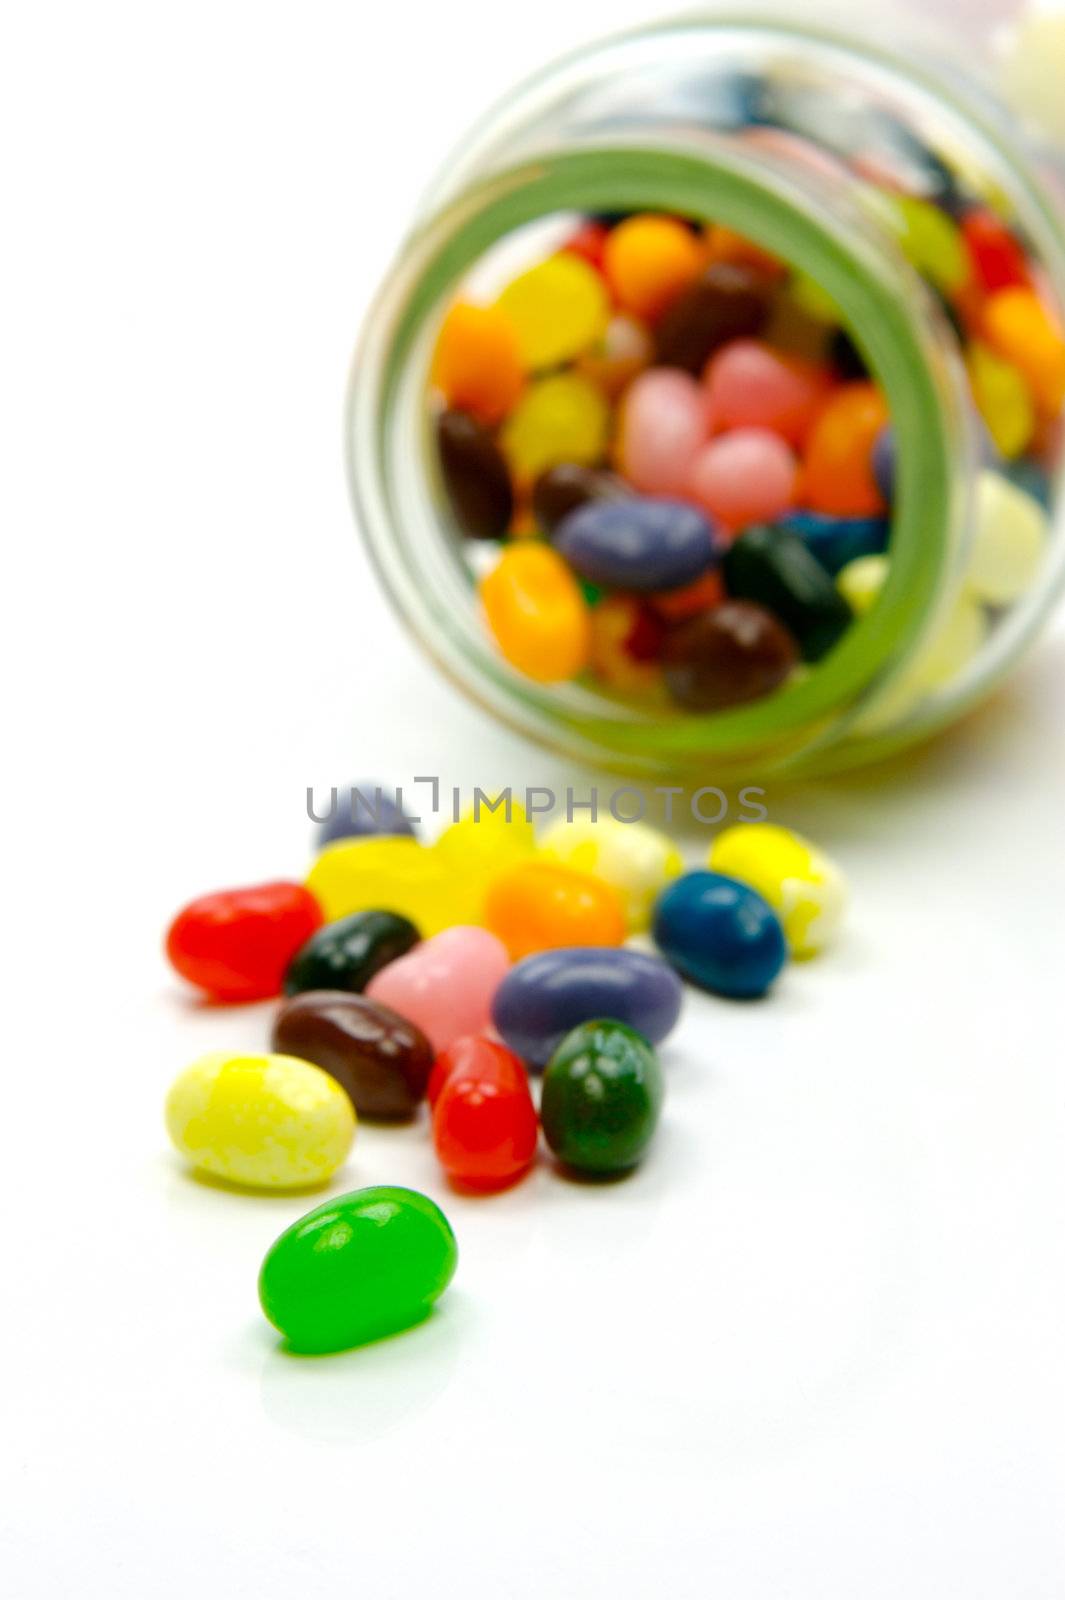 Jelly babies isolated on a white background